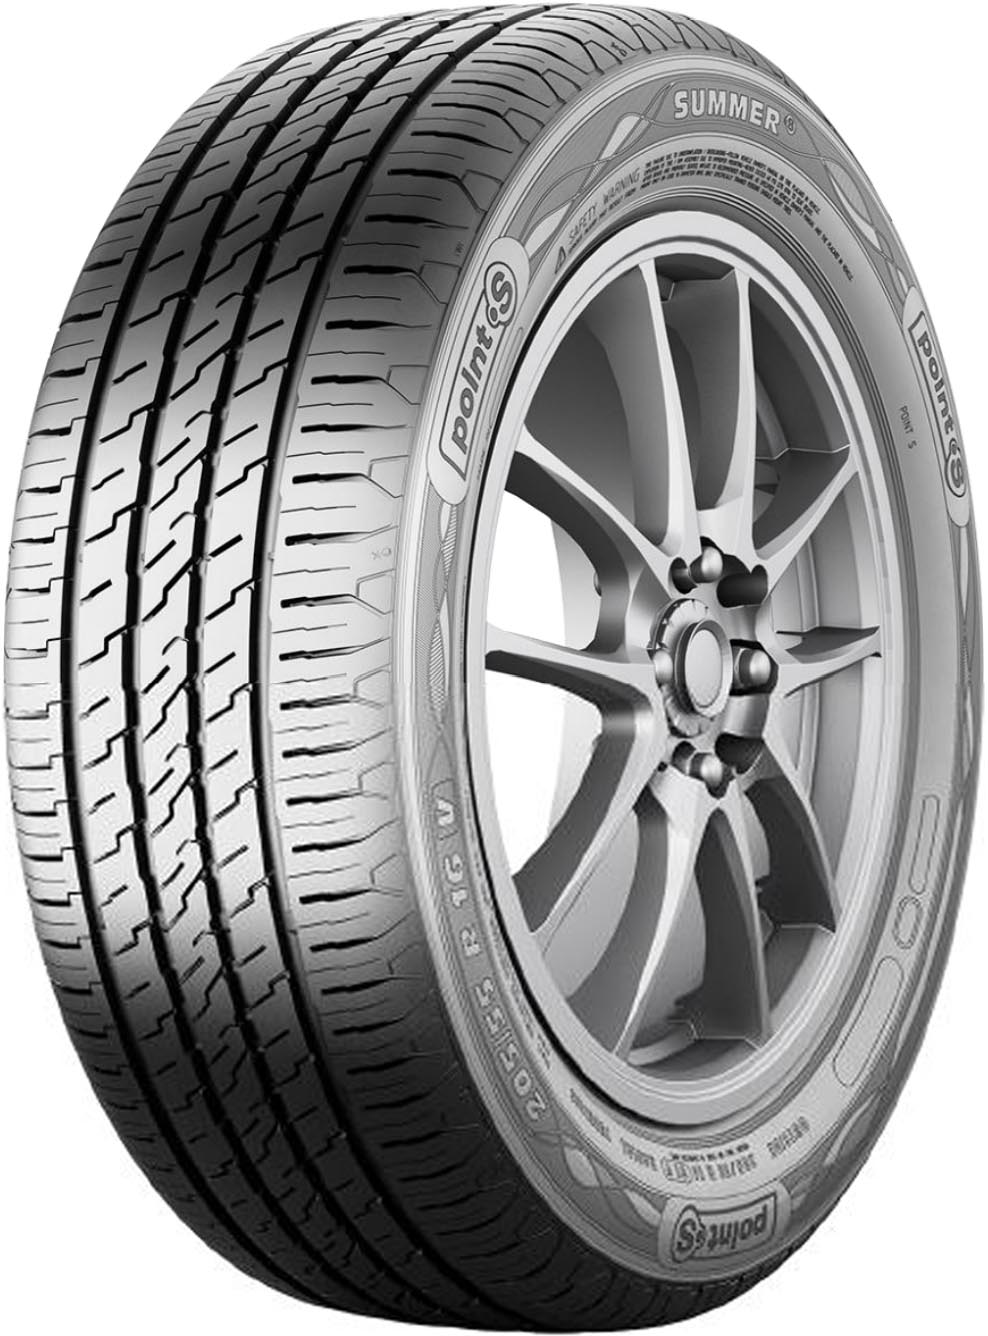 POINTS SUMMER S 225/40R18 92Y